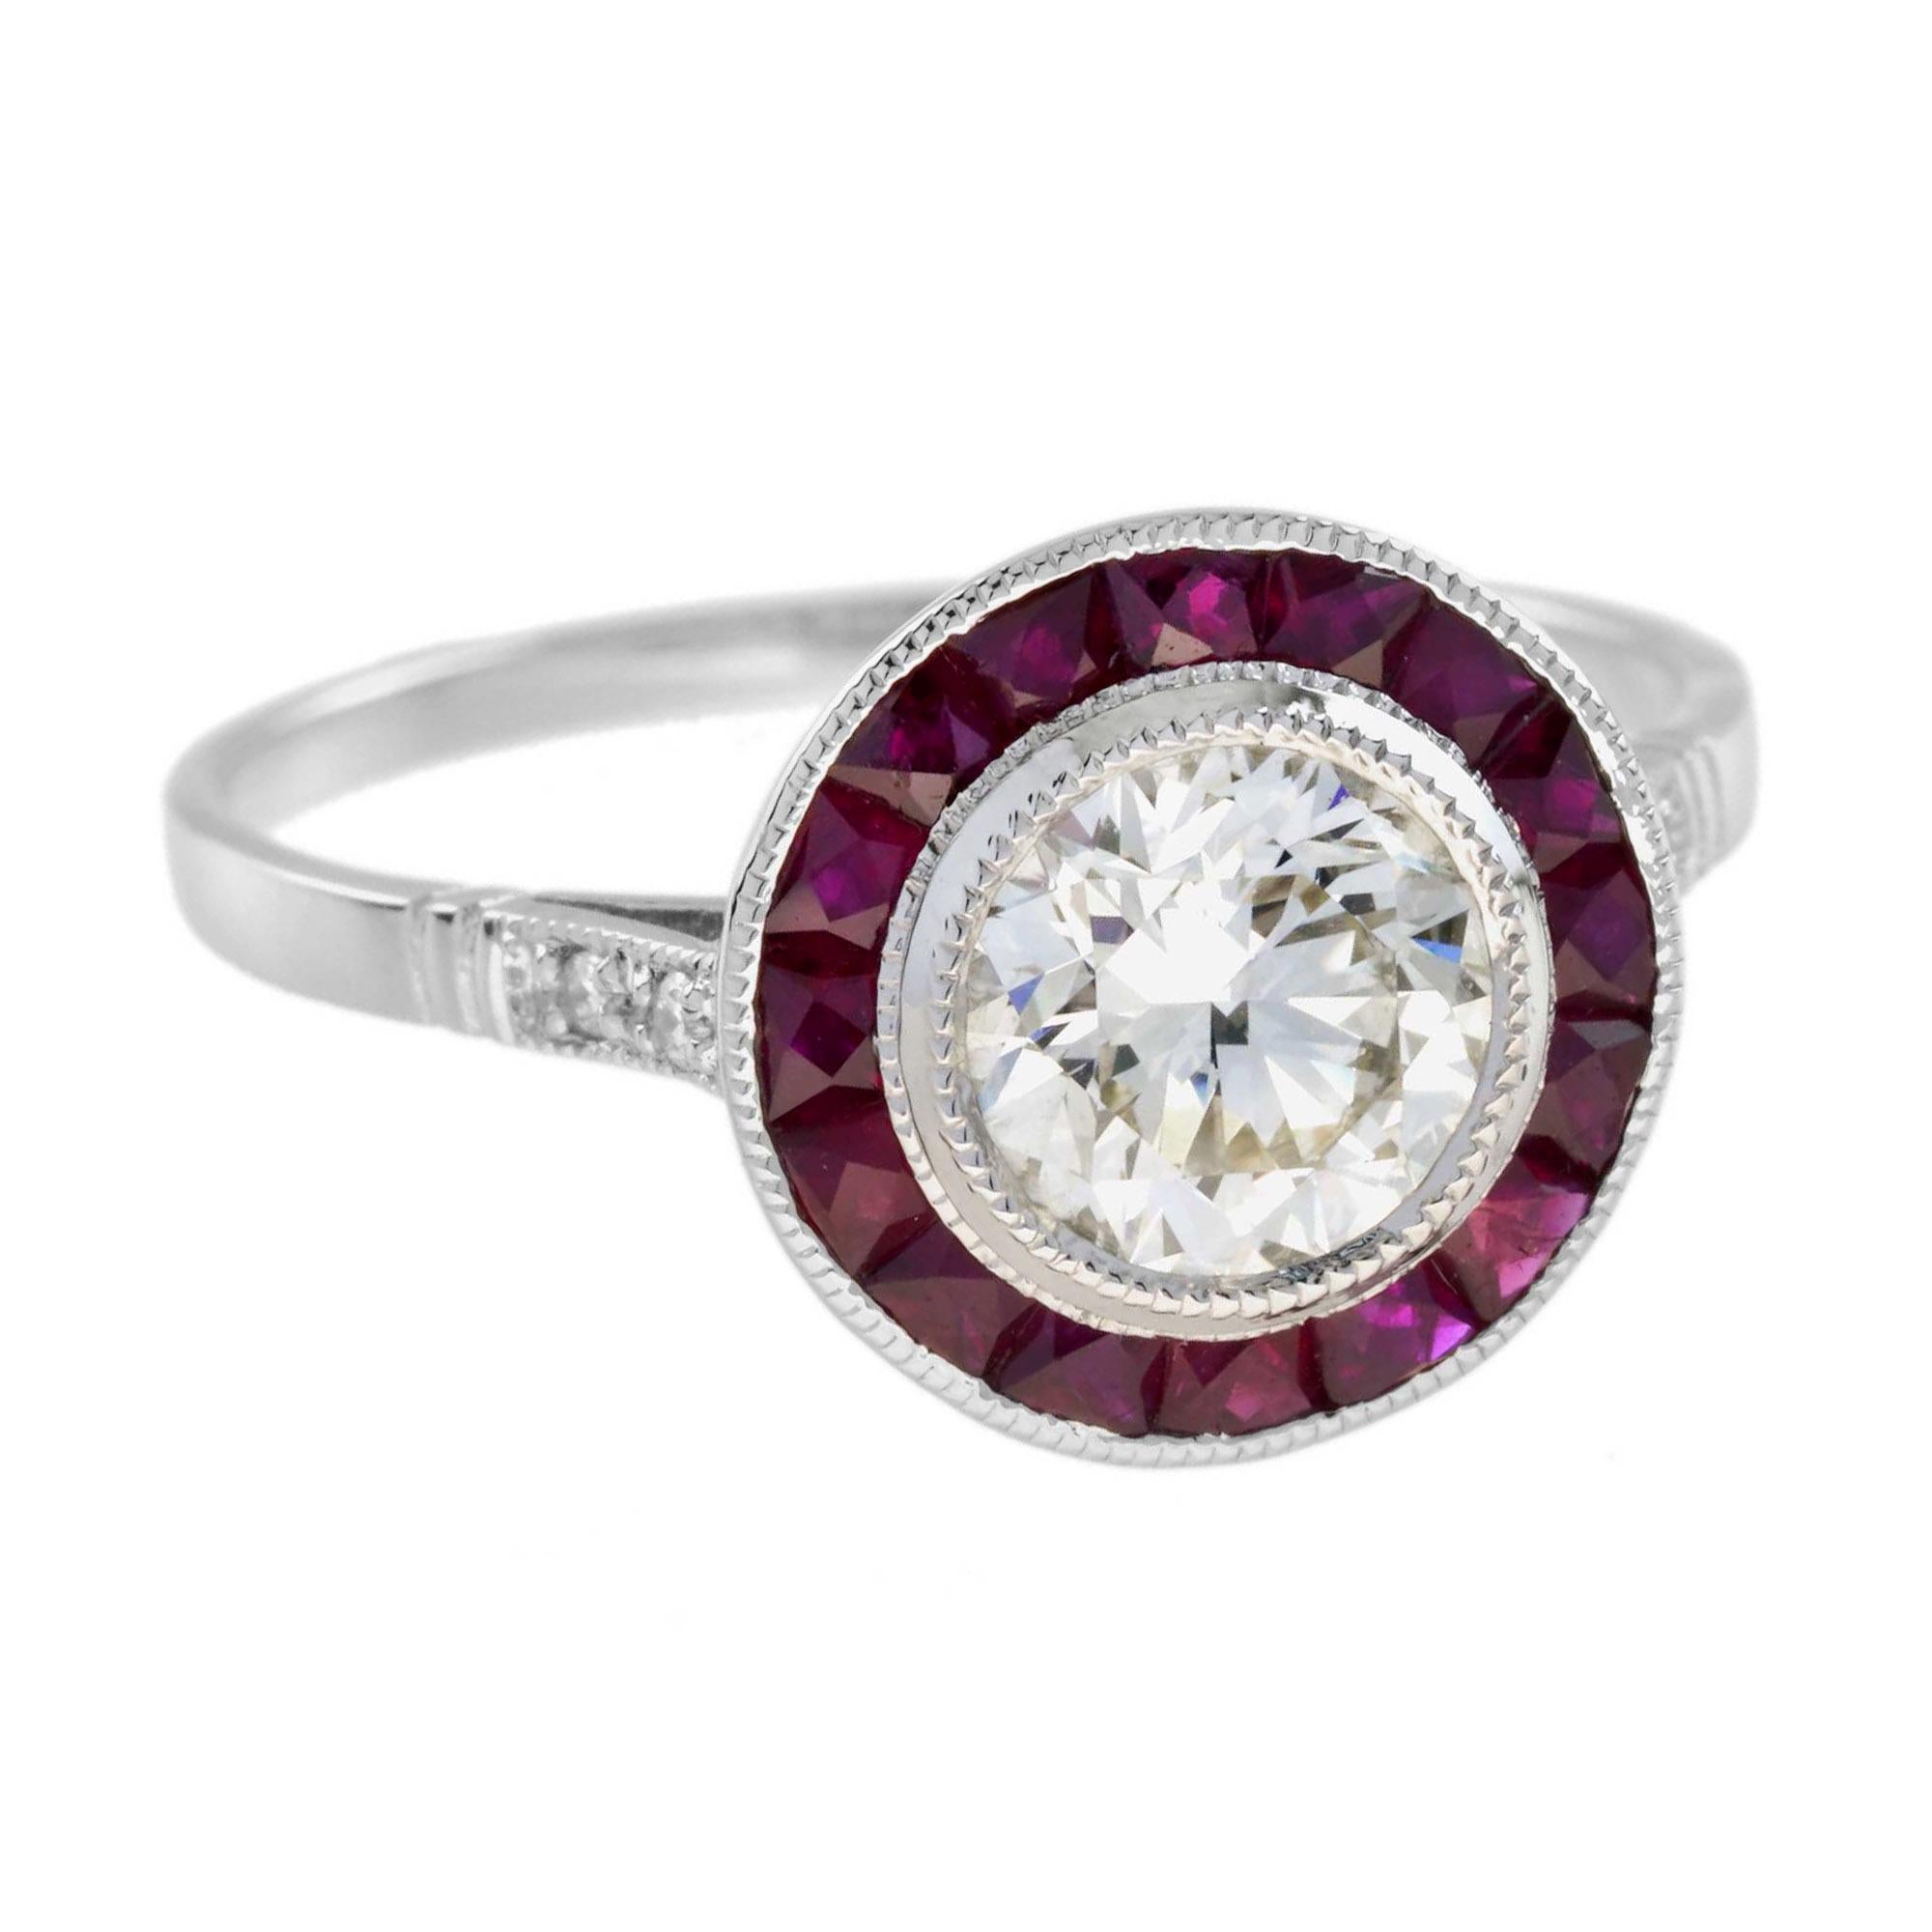 Women's Certified 1 Ct. Diamond and Ruby Art Deco Style Target Ring in Platinum 950 For Sale